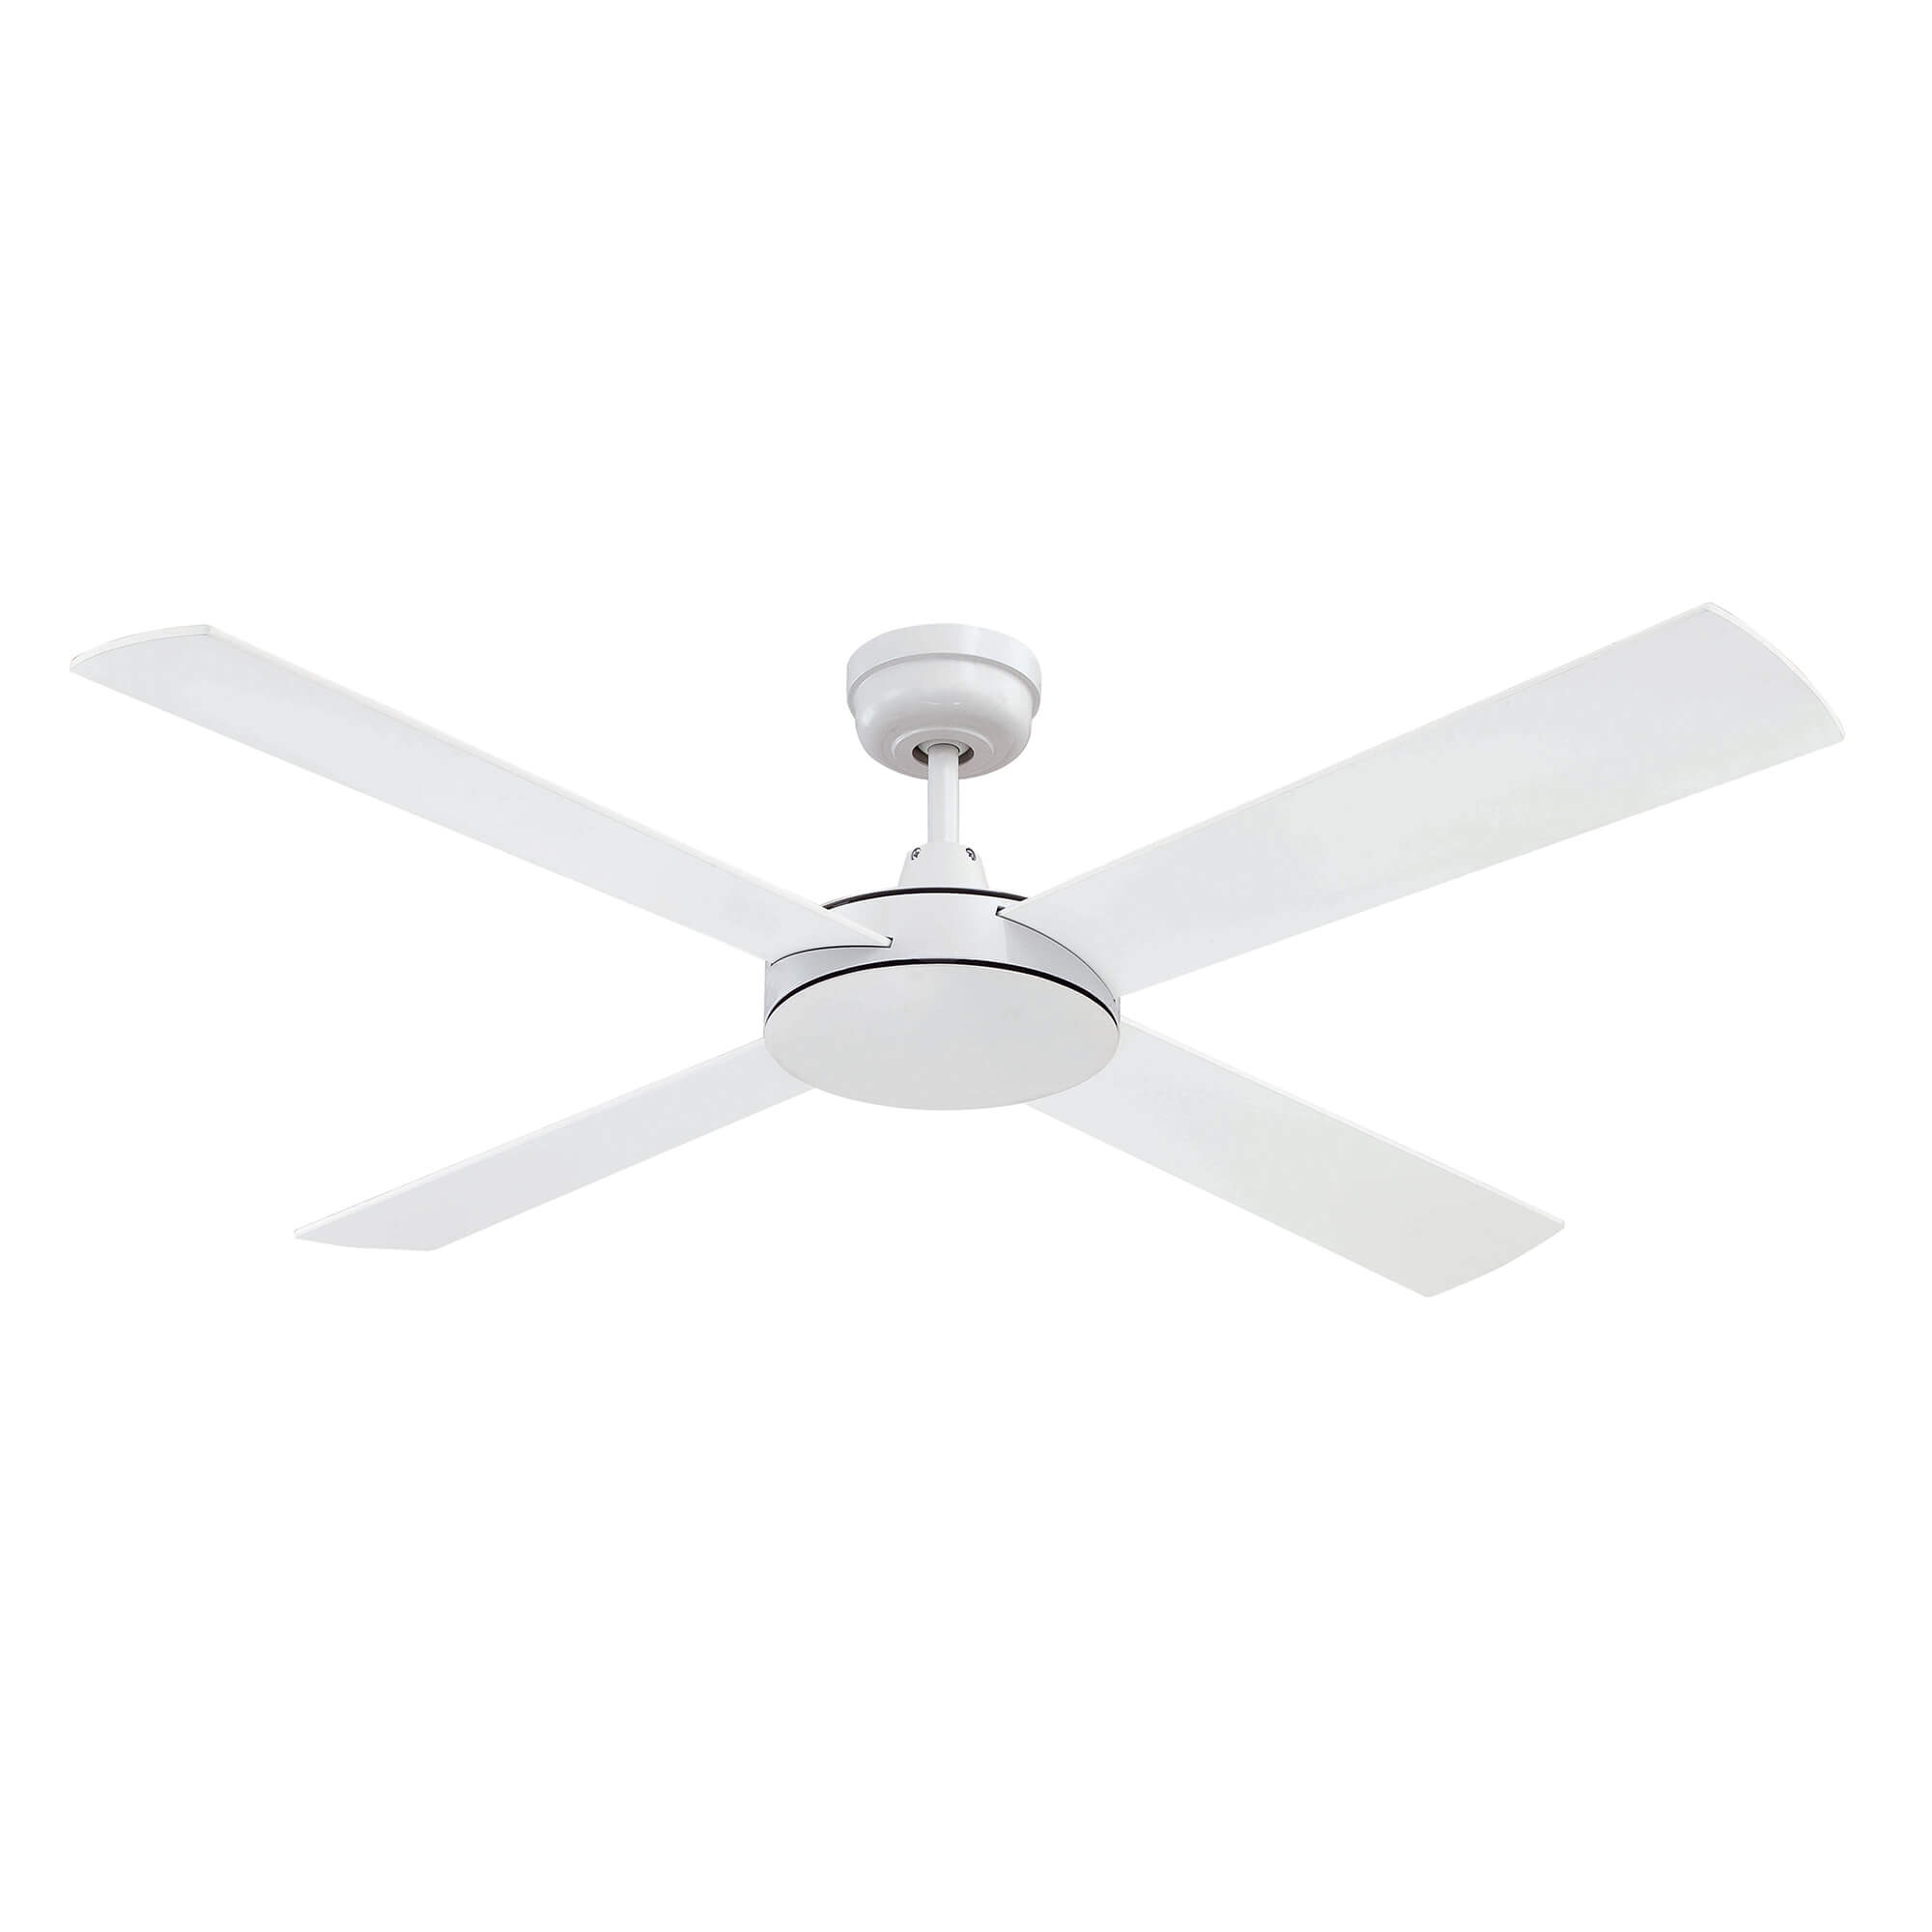 Mercator Ca Pro Fan With Remote, Mercator Ceiling Fan With Light Bunnings